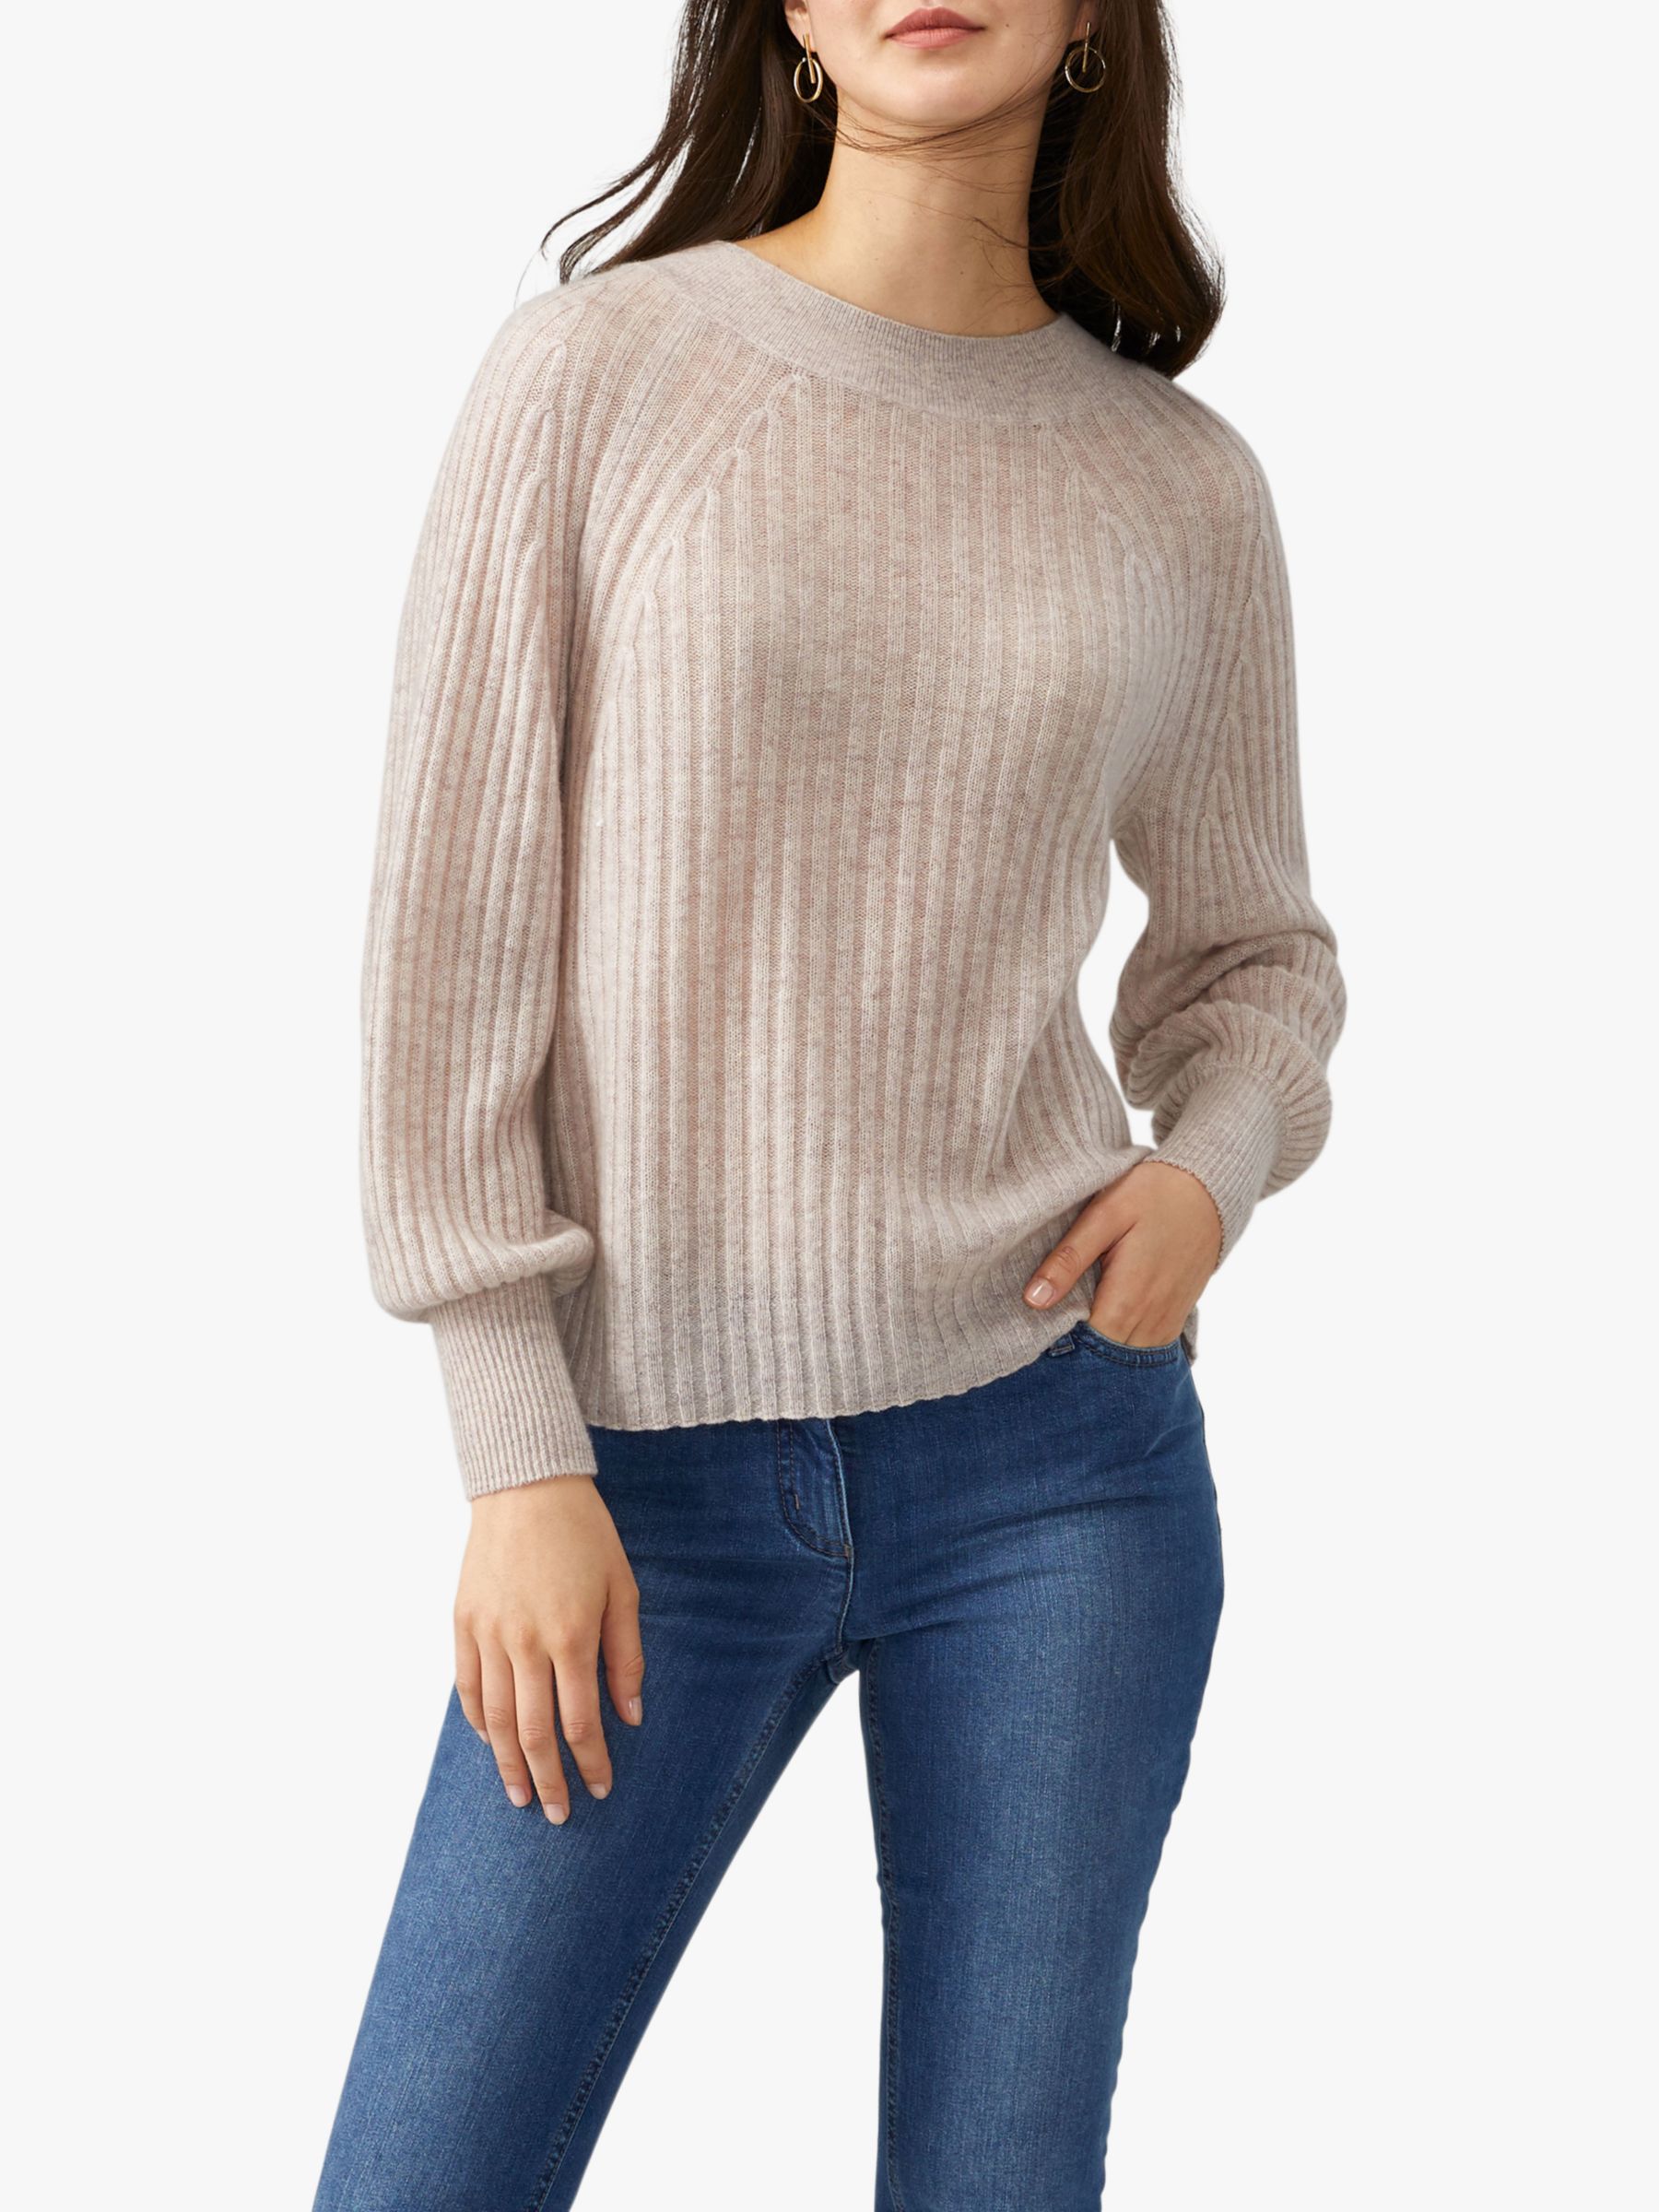 Pure Collection Boat Neck Cashmere Jumper